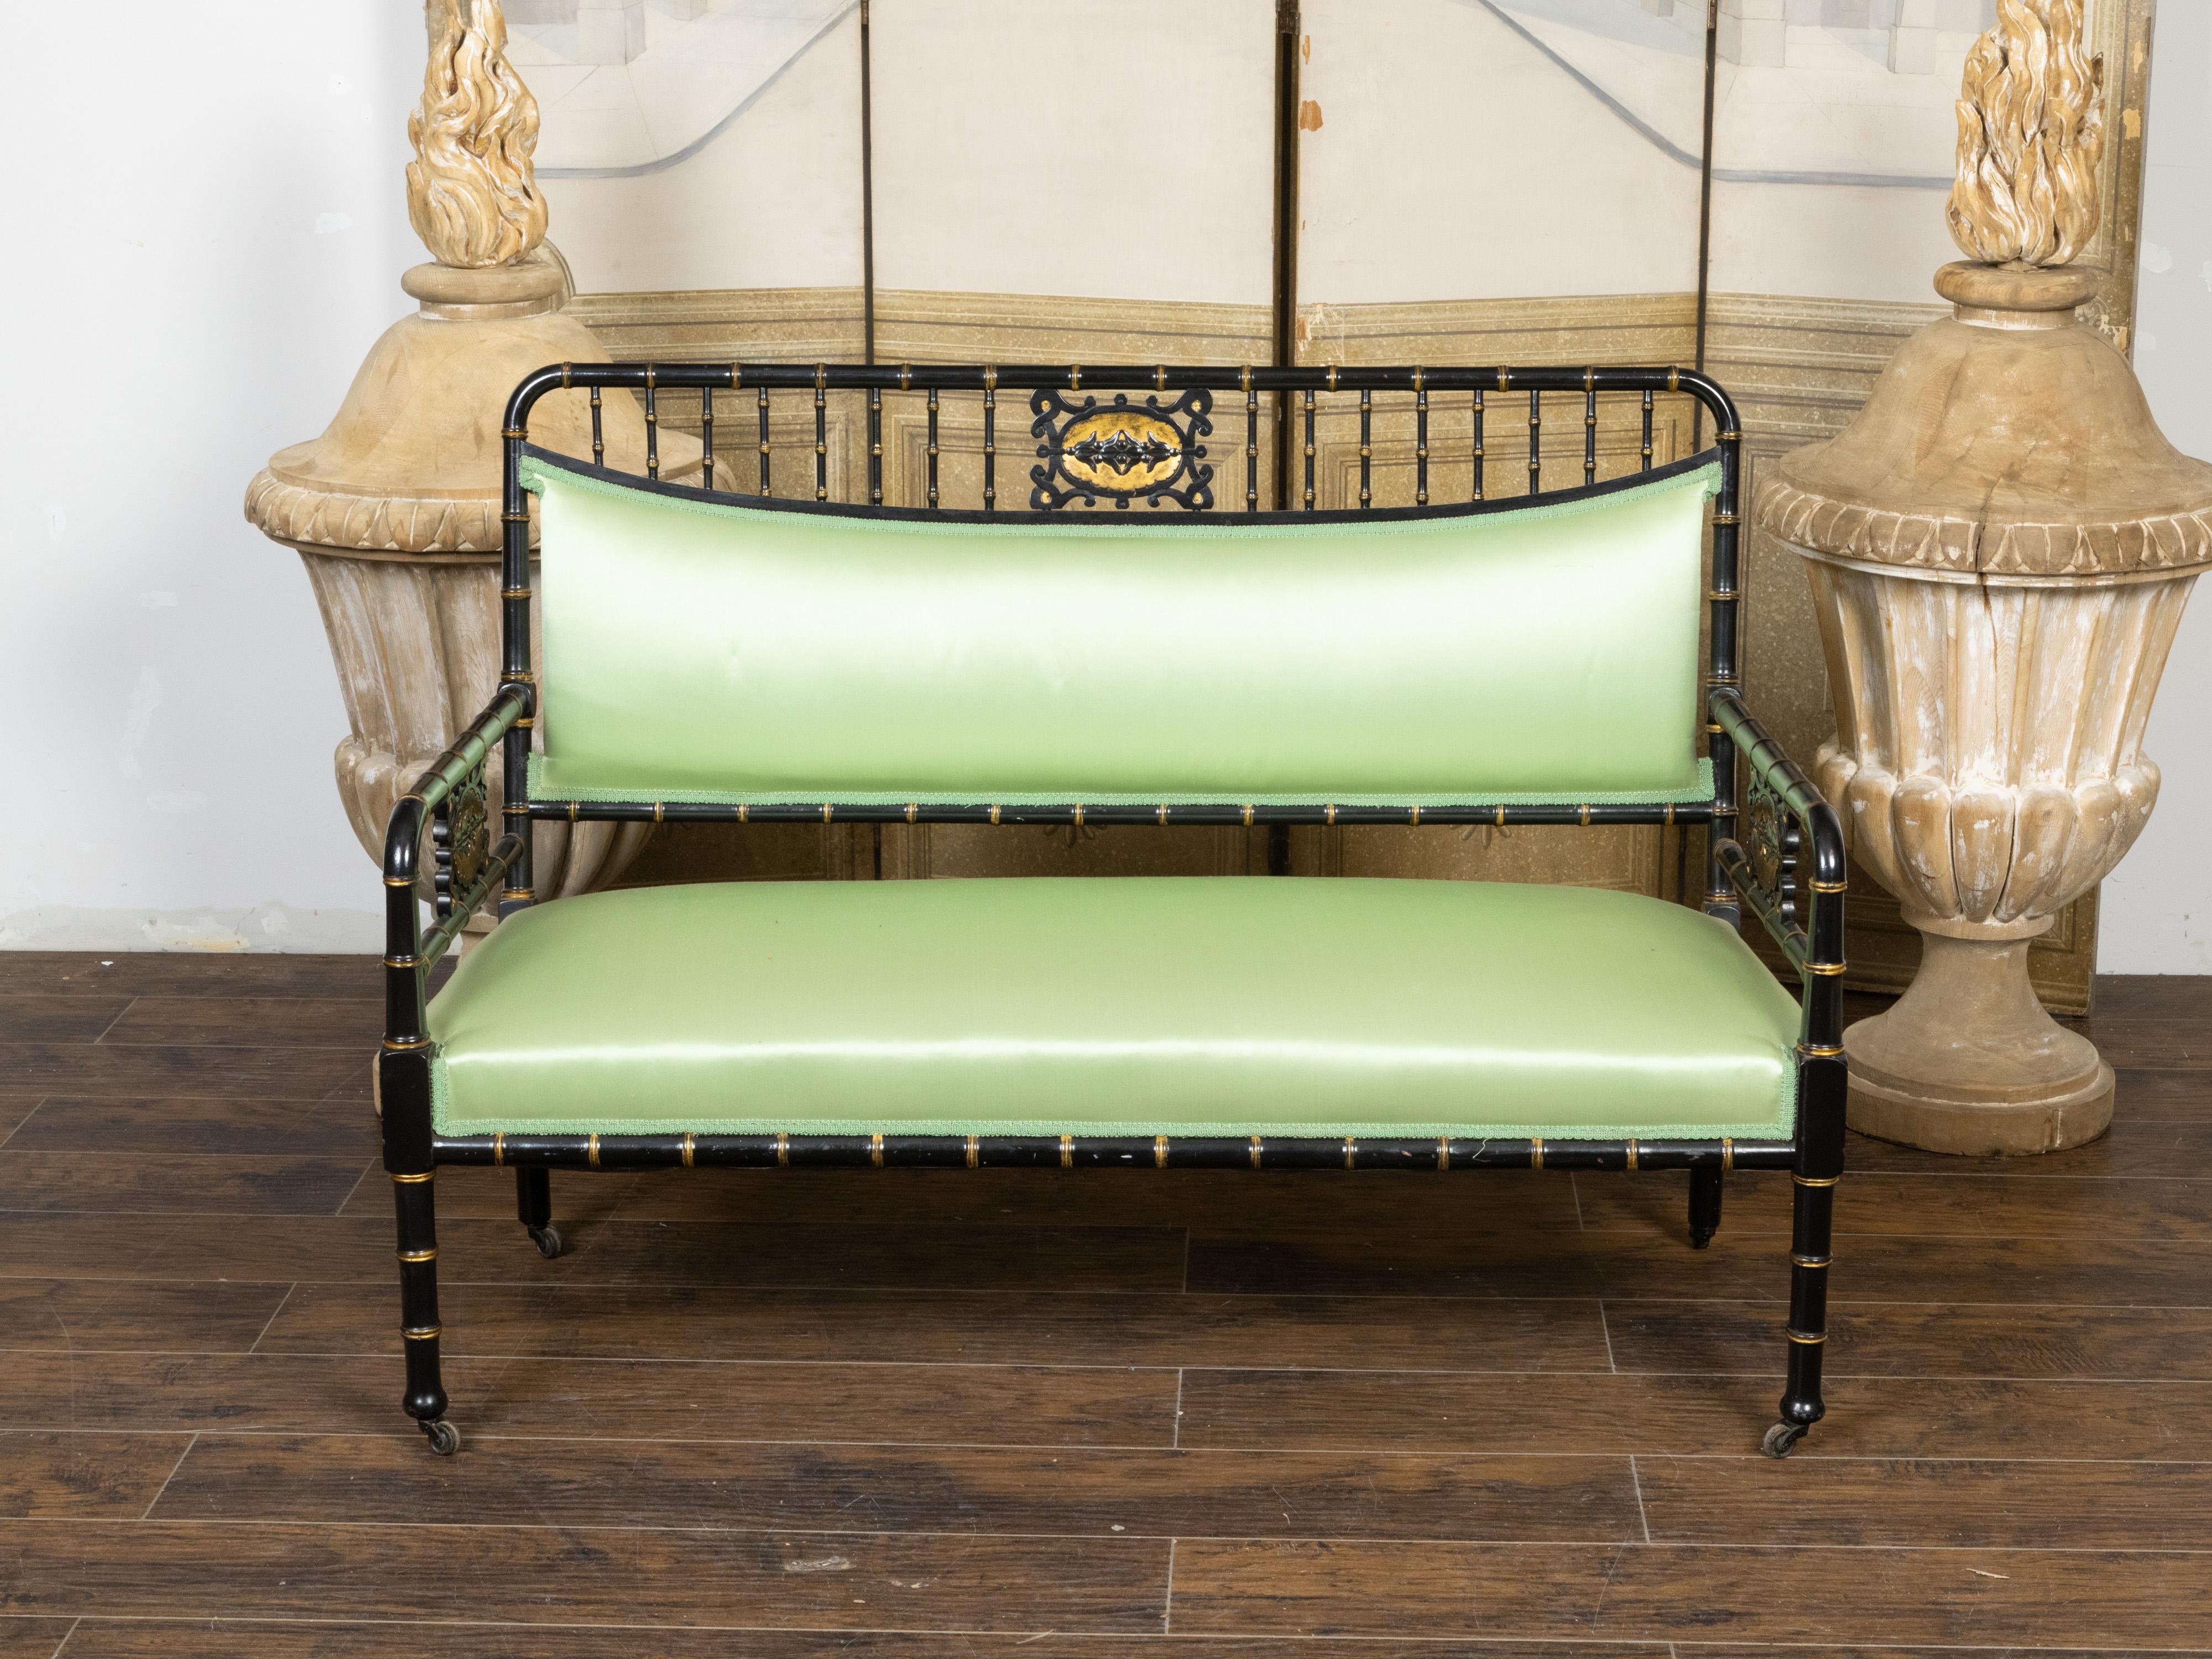 An English faux-bamboo bench on casters from the late 19th century, with ebonized finish, gilt accents, carved medallions and soft green upholstery. Created in England during the last quarter of the 19th century, this faux bamboo bench features a